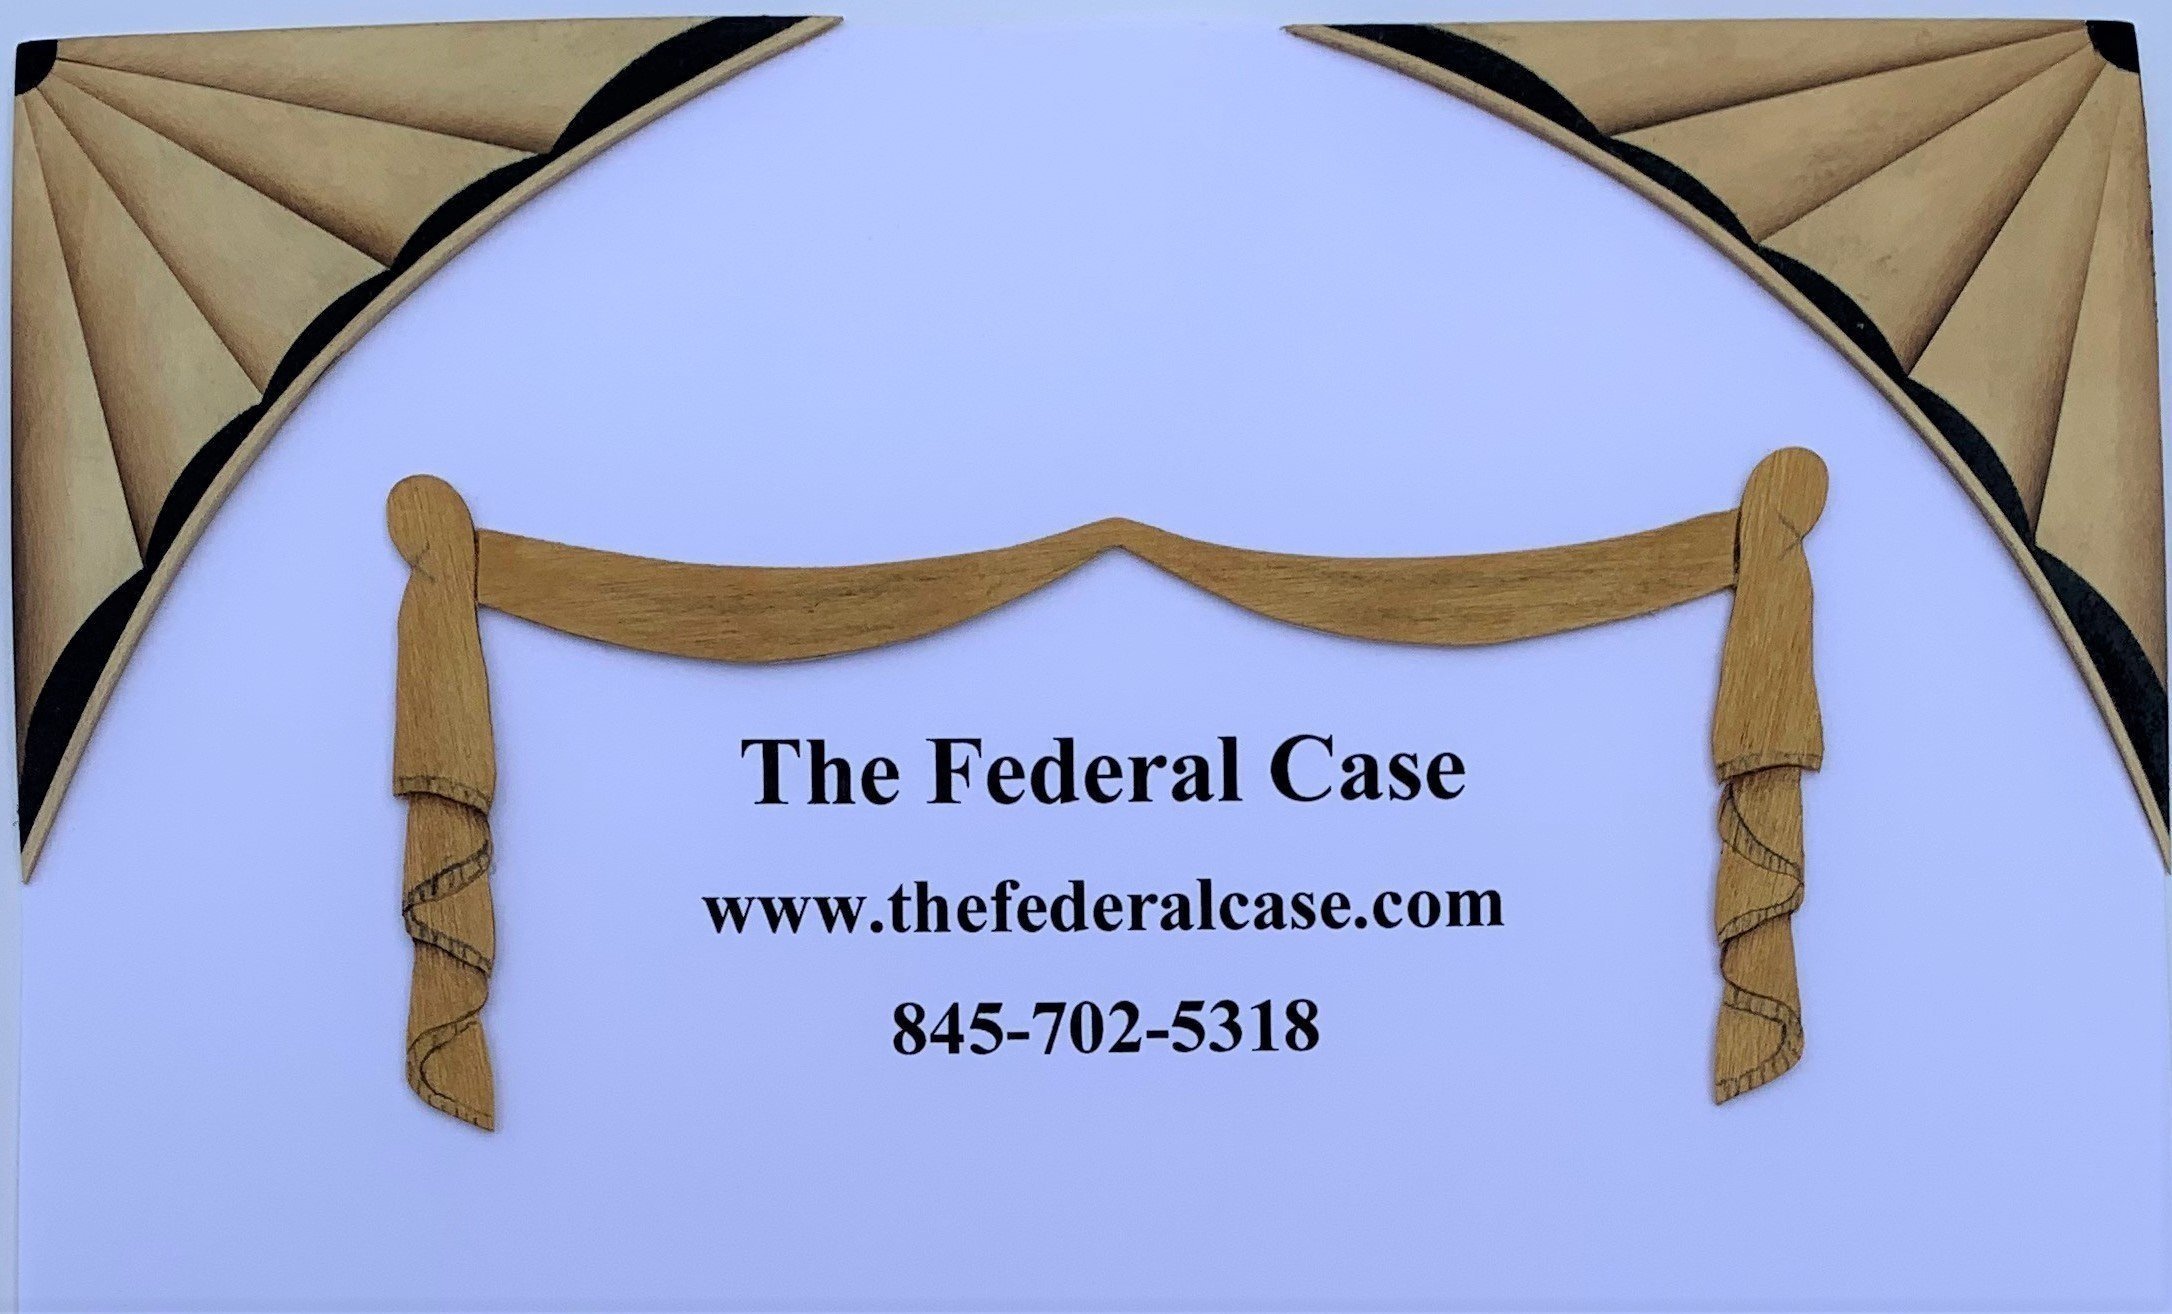 THE FEDERAL CASE